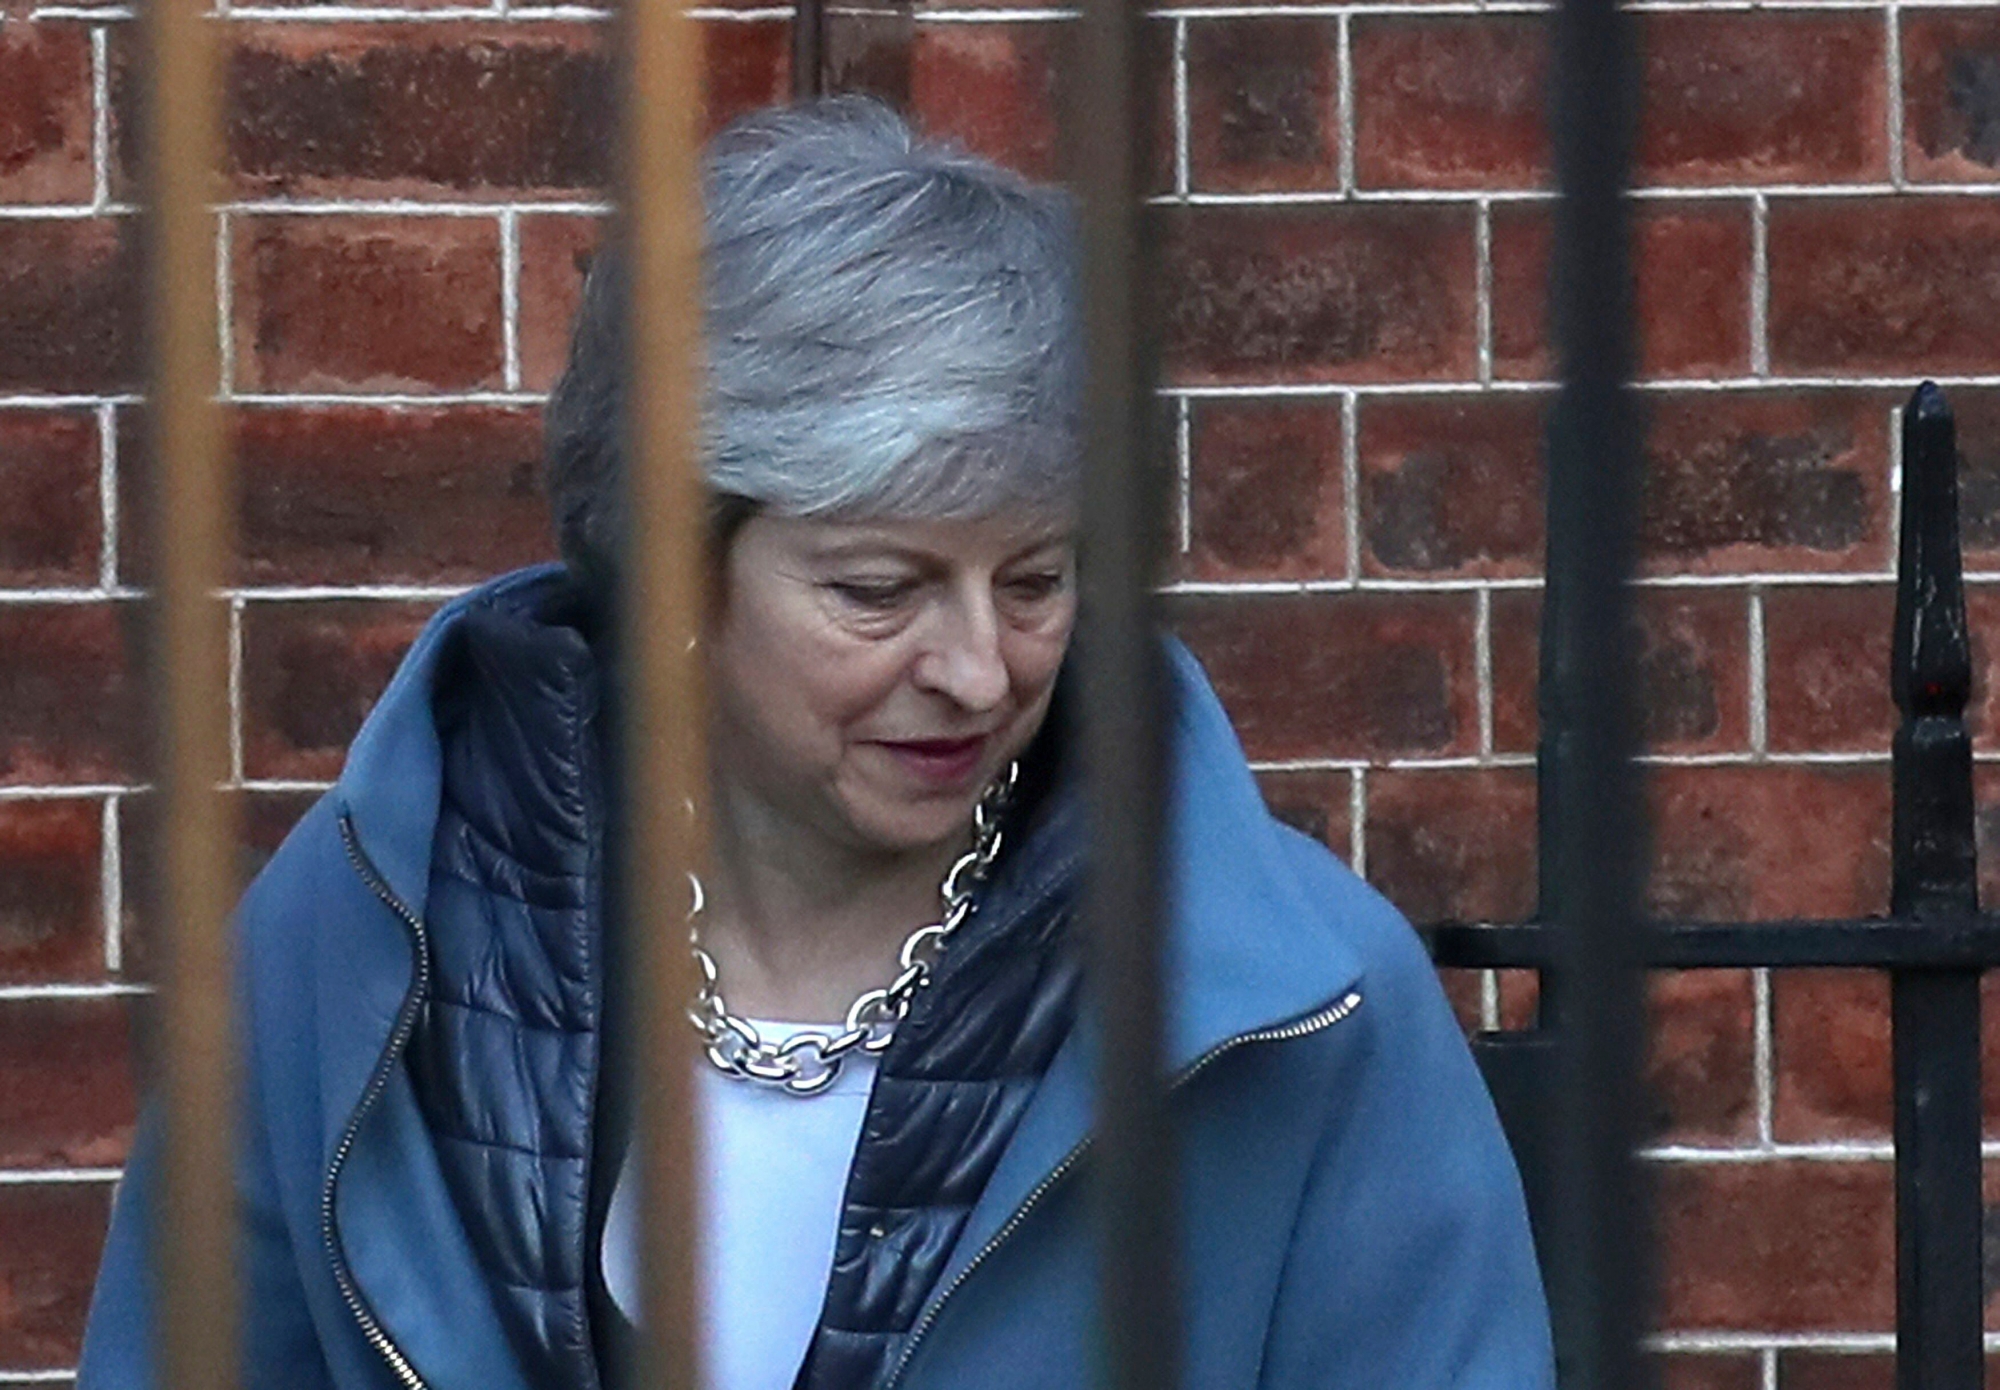 Britain's Prime Minister Theresa May leaves 10 Downing Street for the House of Commons ahead of a Brexit vote, in London, Thursday, Feb. 14, 2019.  May was scrambling Thursday to avoid another defeat on her Brexit plans amid opposition from members of her own party who claim she is moving in the wrong direction in efforts to overcome the impasse blocking a deal. (Steve Parsons/PA via AP) Britain Brexit